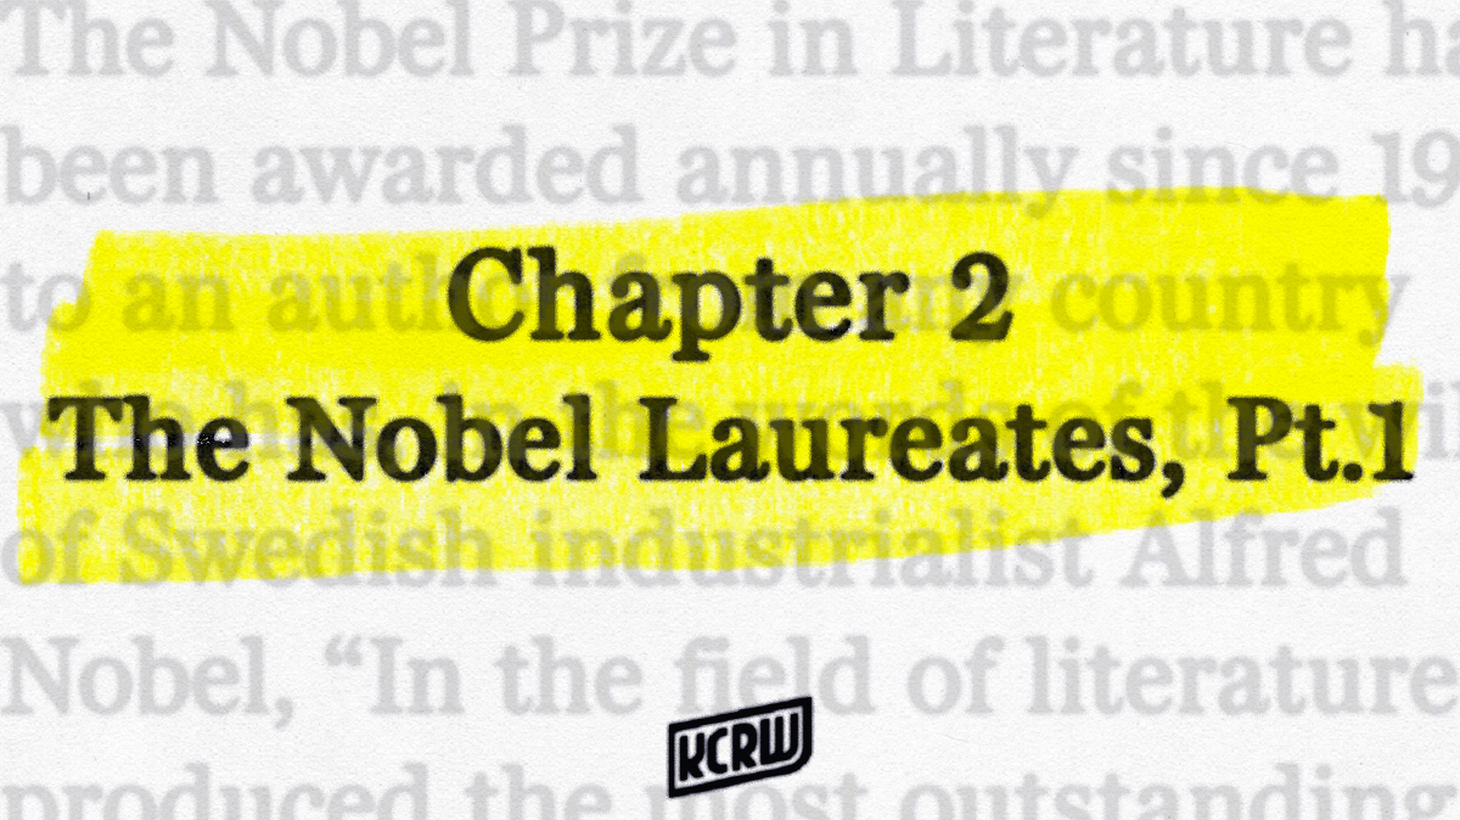 The Nobel Prize in Literature has been awarded annually since 1901 to an author from any country who has, in the words of the will of Swedish industrialist Alfred Nobel, “In the field of literature produced the most outstanding work in an idealistic direction.” Michael Silverblatt spoke with eight Nobel Prize laureates. In part 1 of The Nobel Laureates, we’ll be hearing from four of them: Toni Morrison, Wole Soyinka, Orhan Pamuk, and Seamus Heaney.